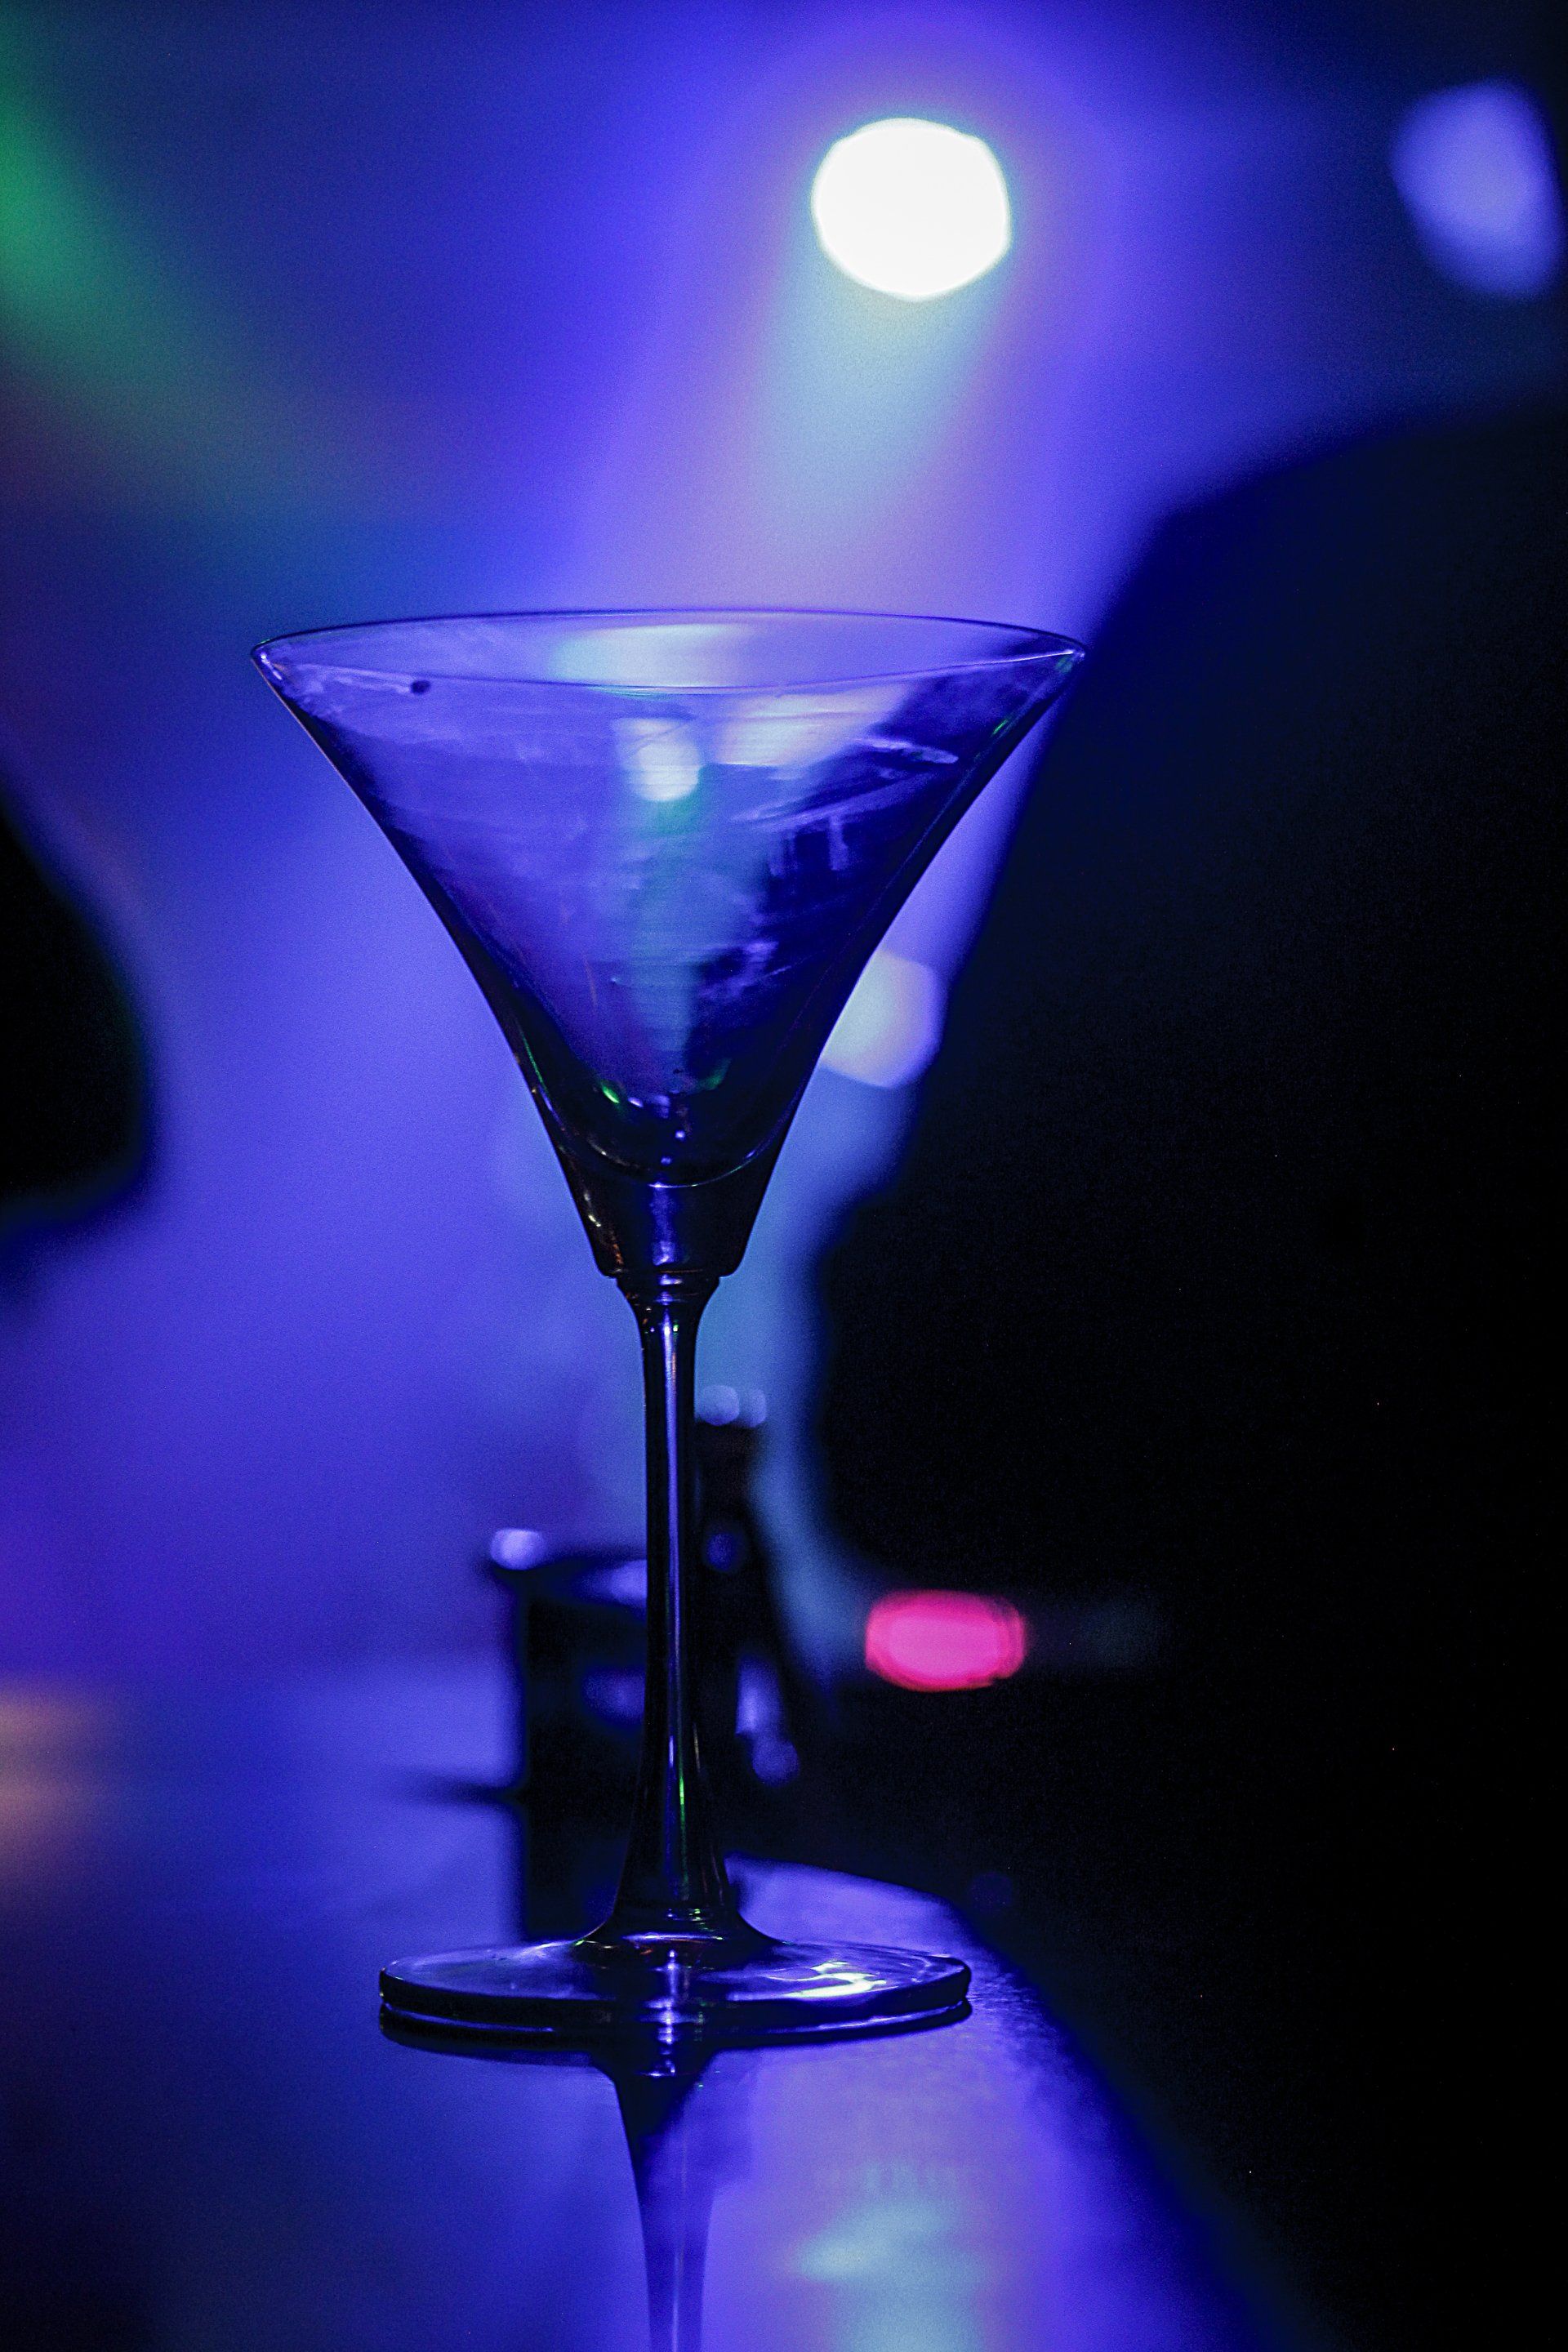 A martini glass filled with a blue liquid is sitting on a bar.